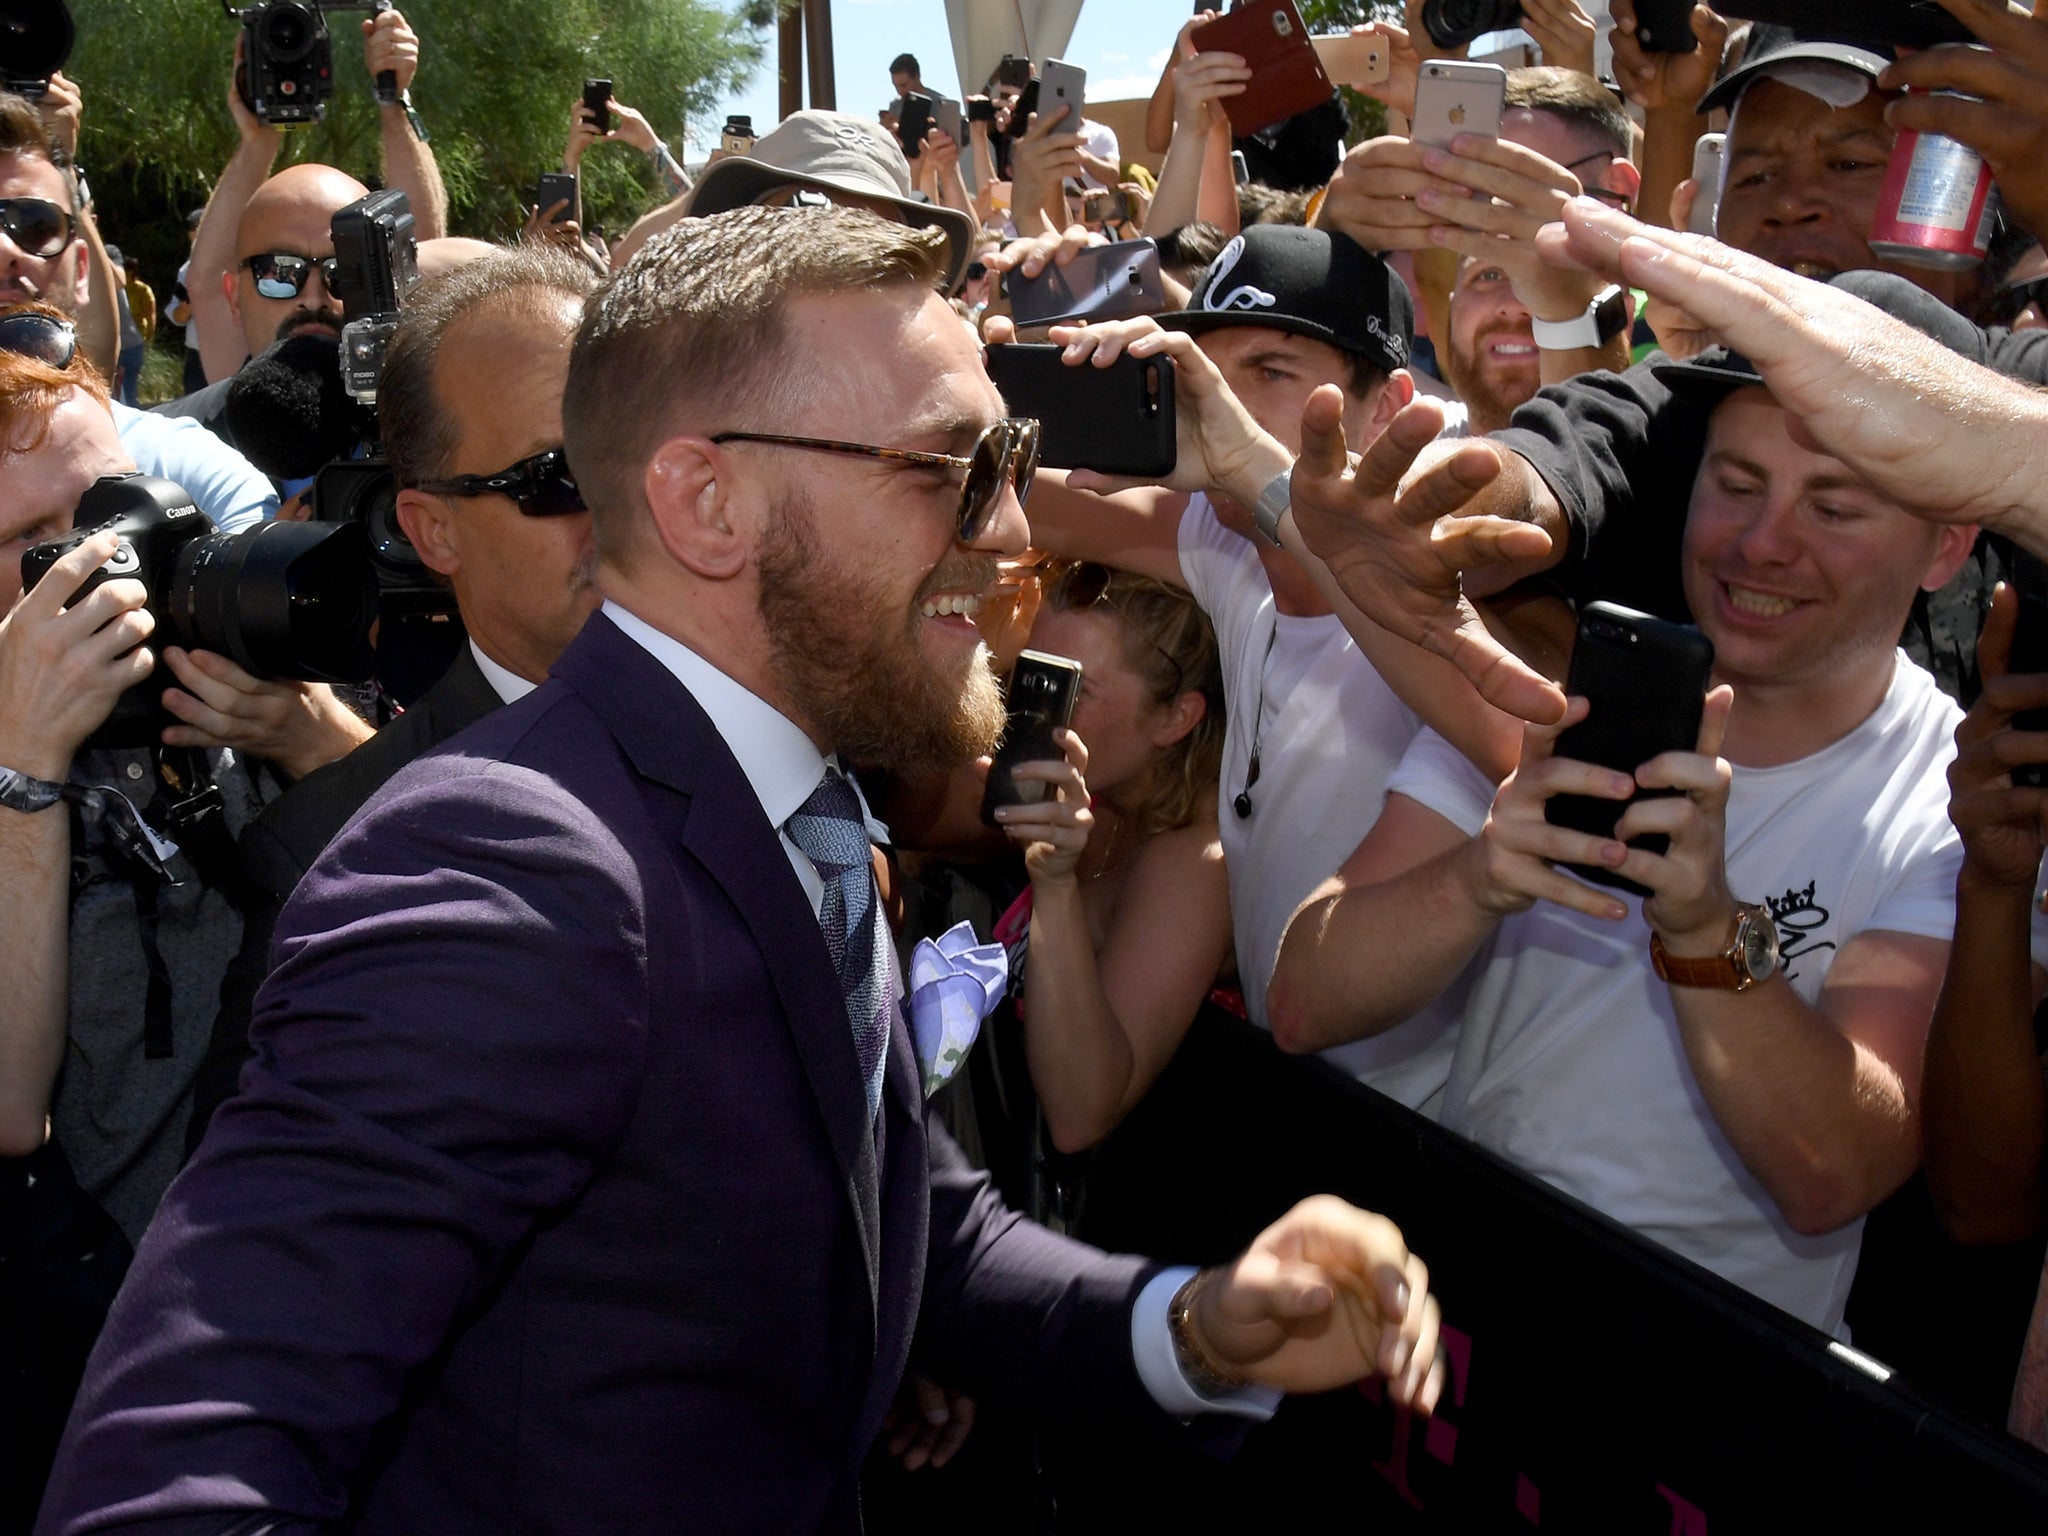 The stupidity of this whole farce shows why Conor McGregor vs Floyd Mayweather is a complete freak show